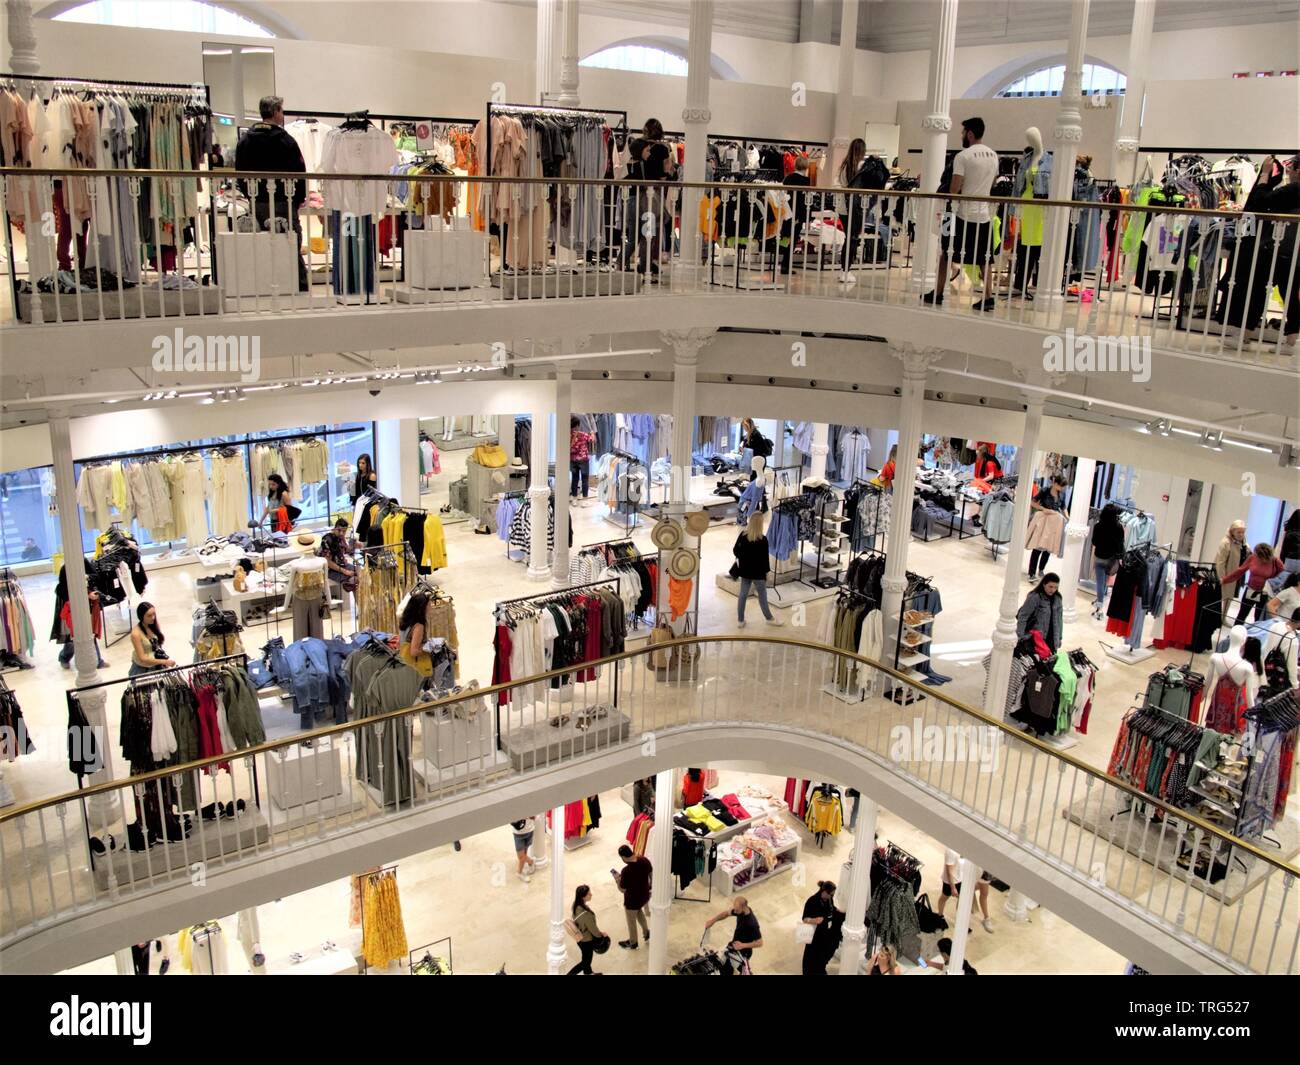 people and shops in Zara fashion store in Rome Stock Photo - Alamy